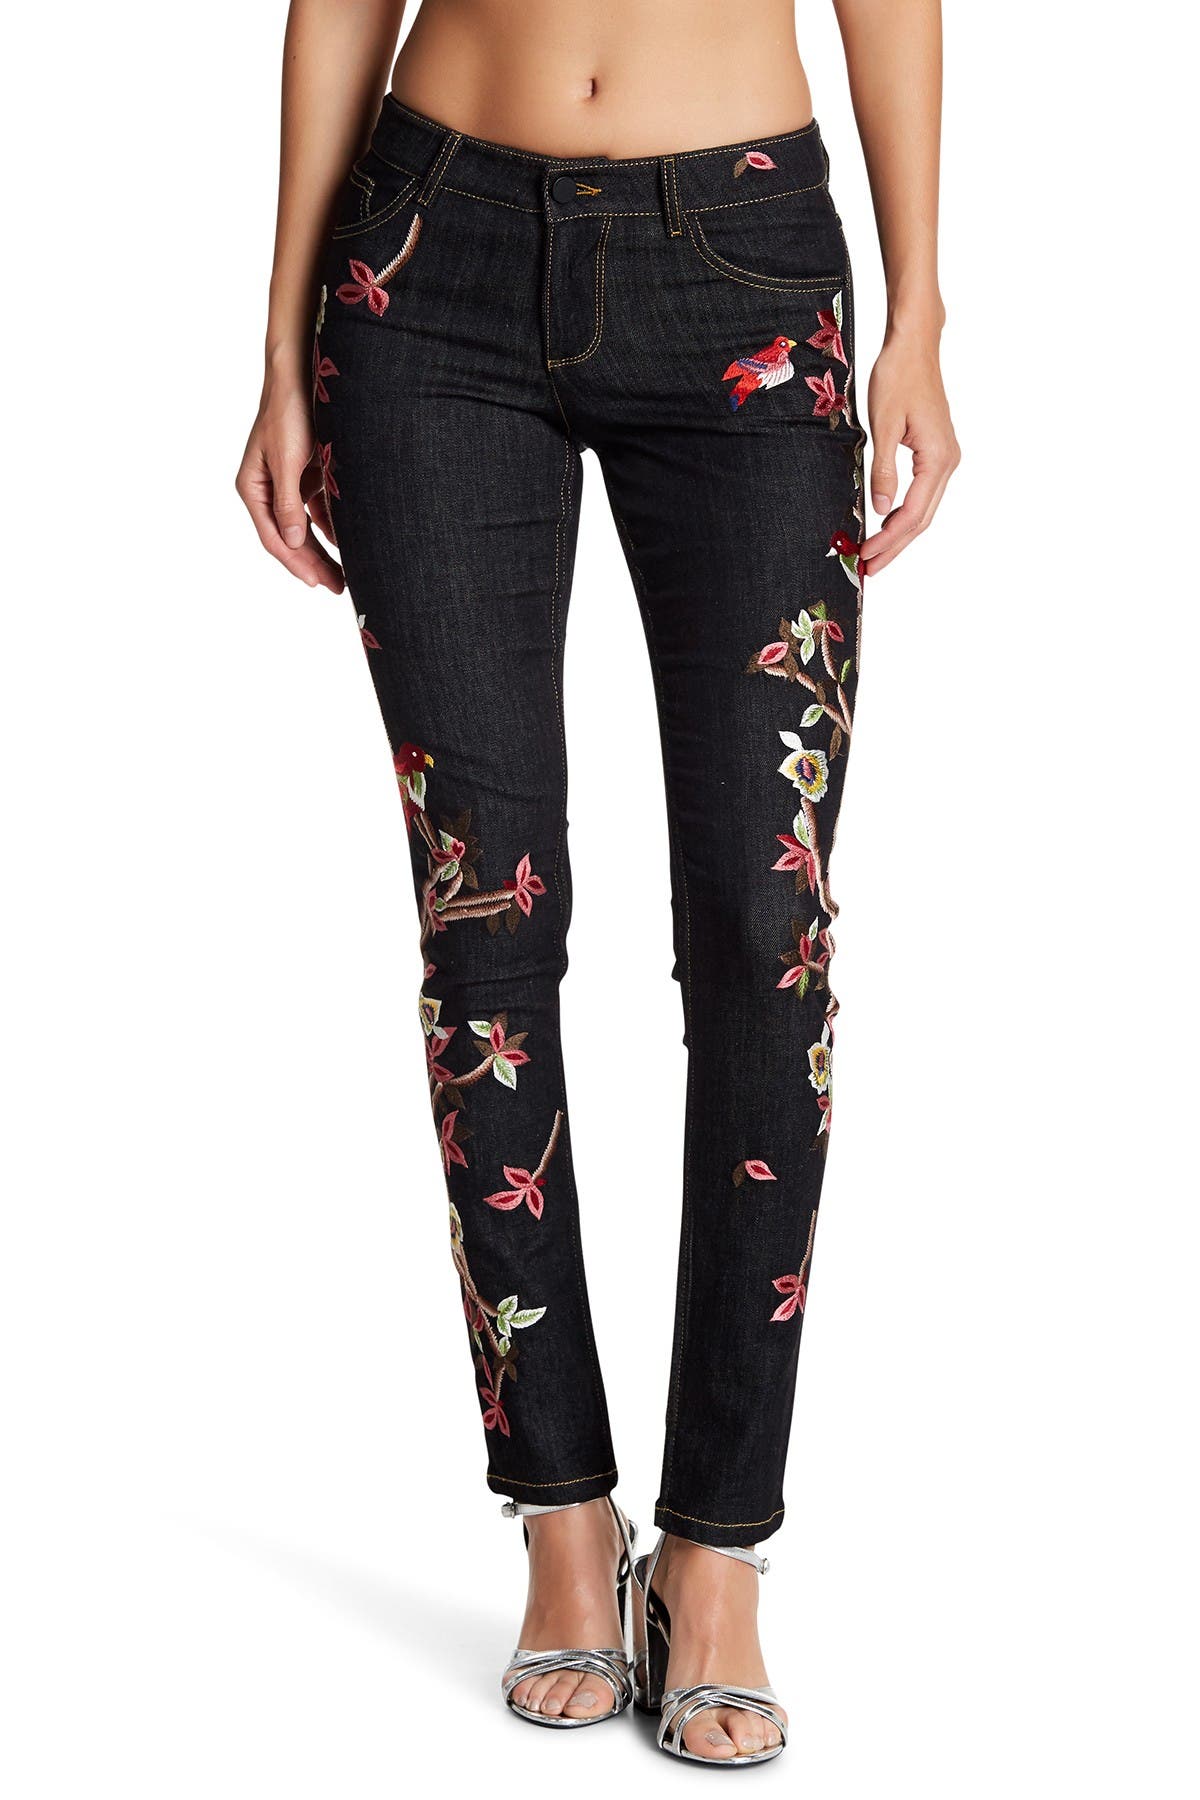 alice olivia embroidered jeans